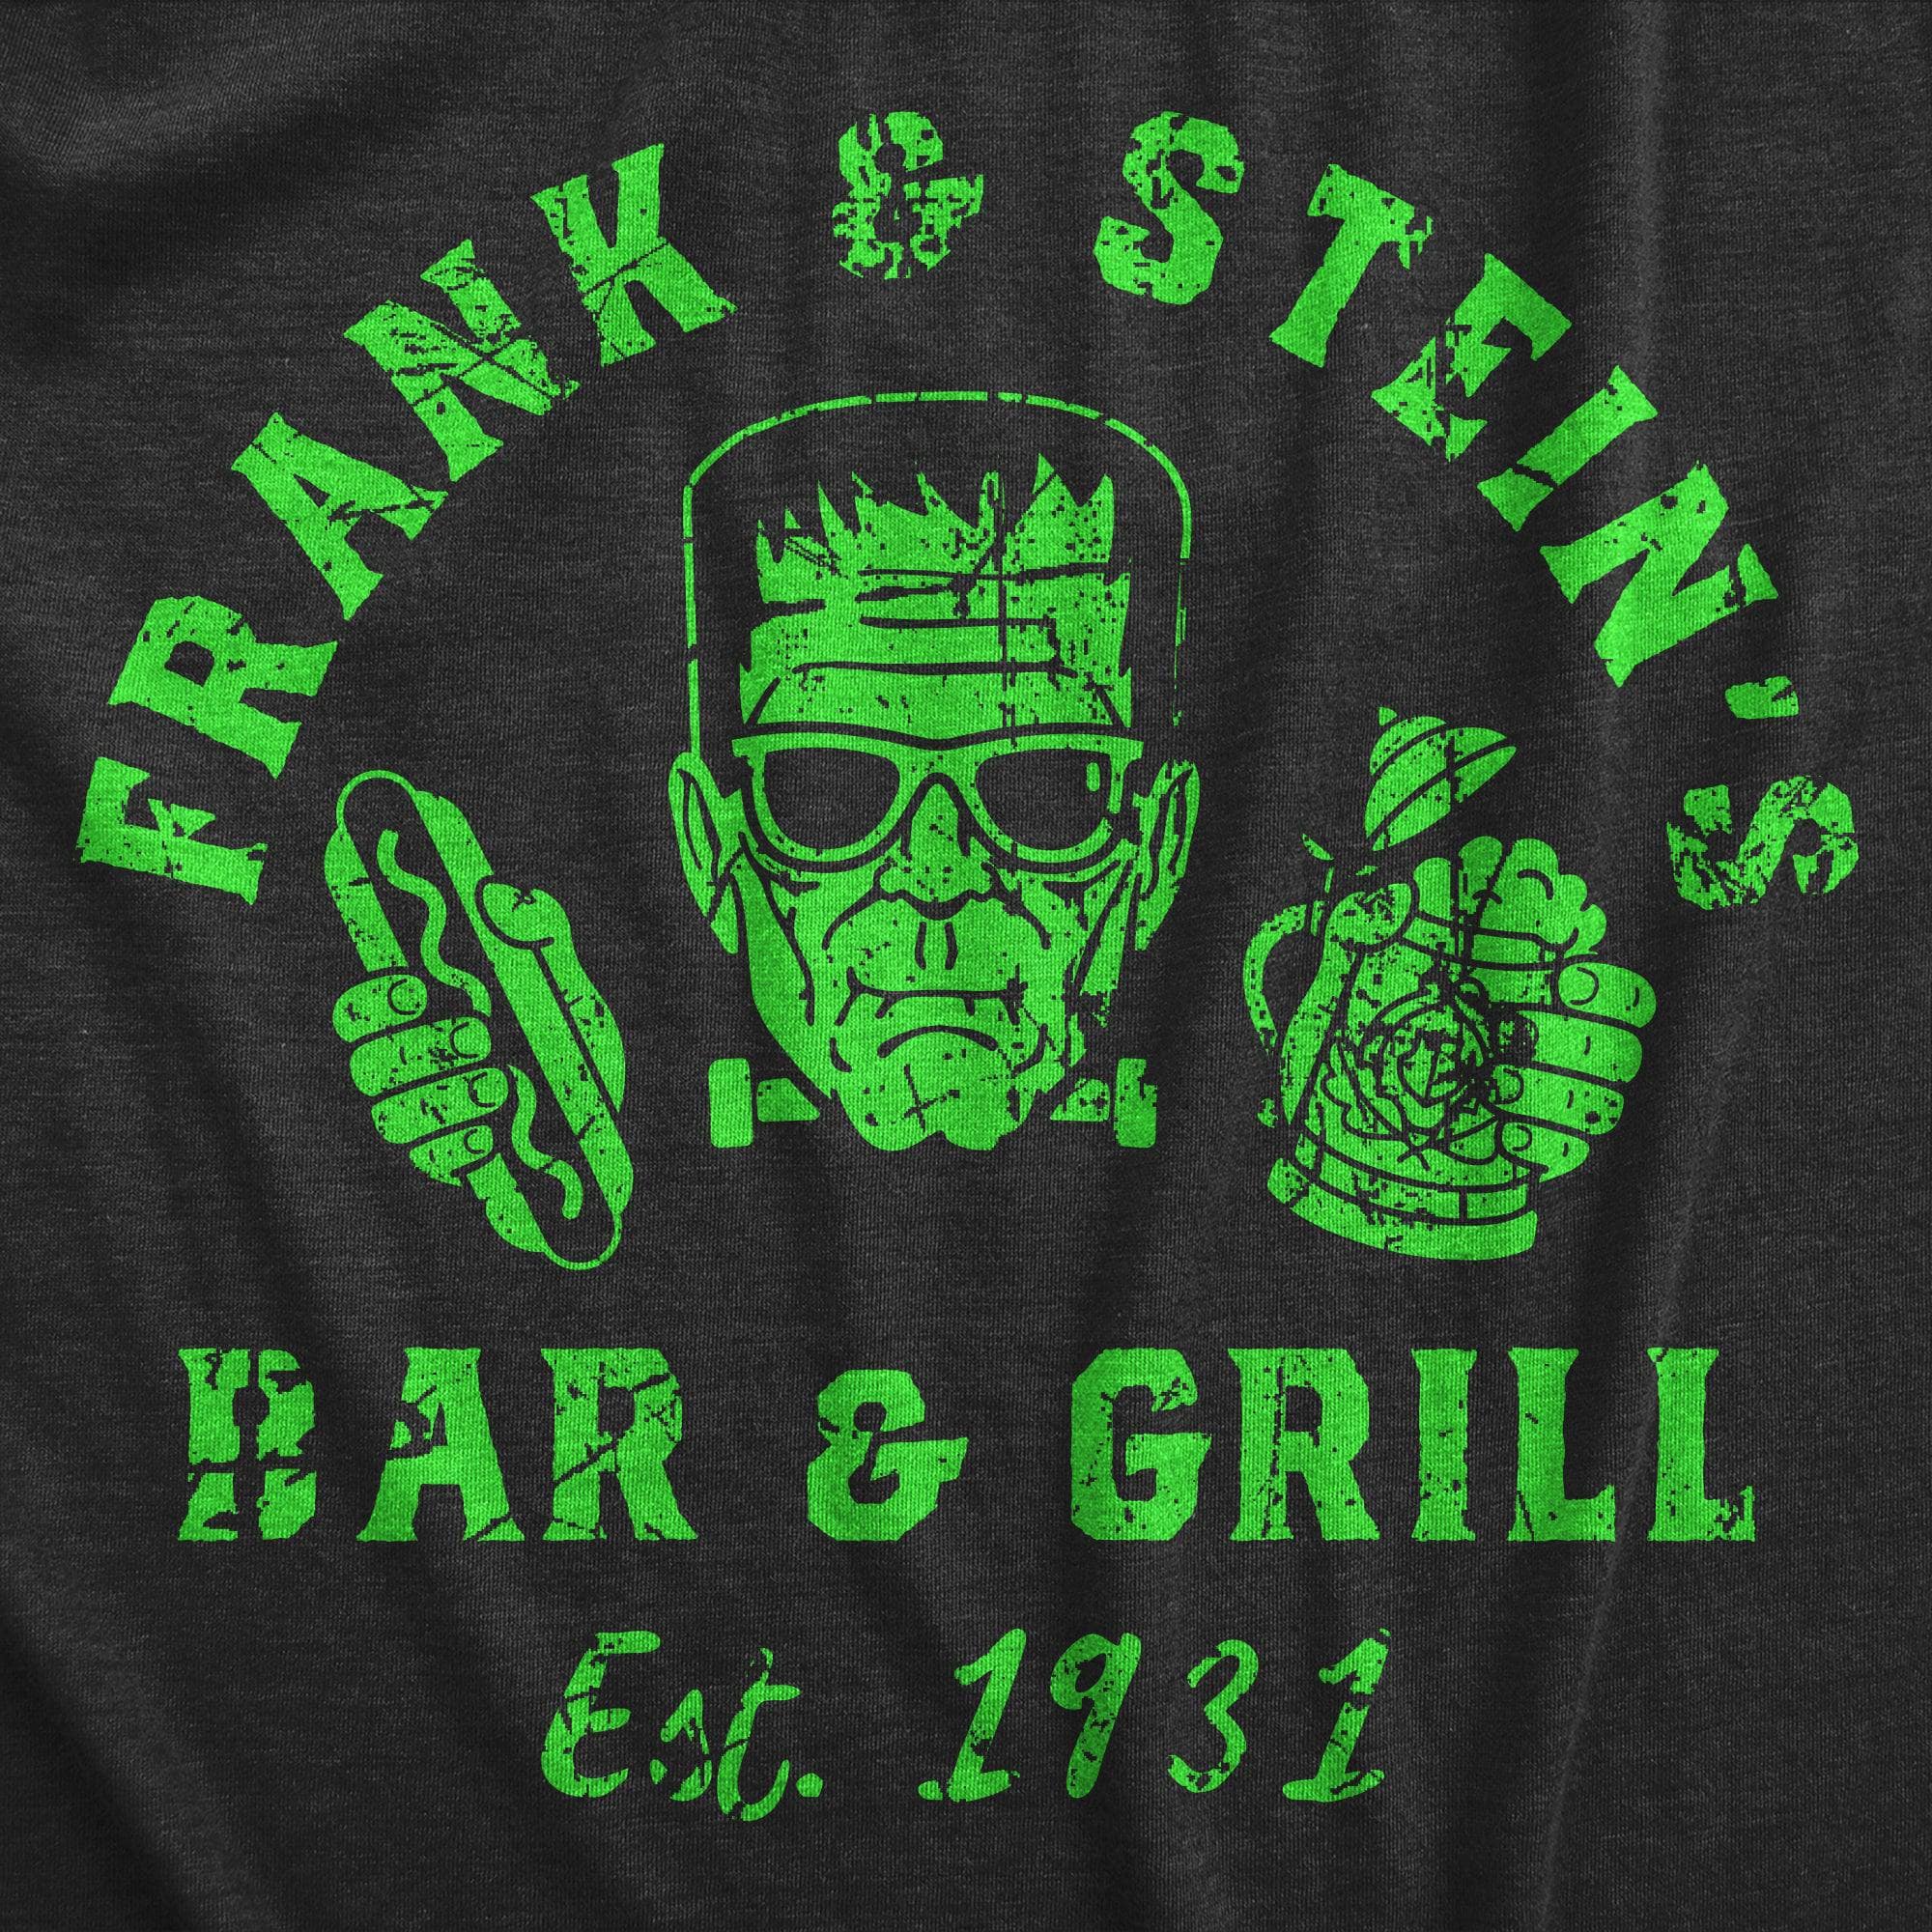 Frank And Steins Bar And Grill Men's Tshirt  -  Crazy Dog T-Shirts